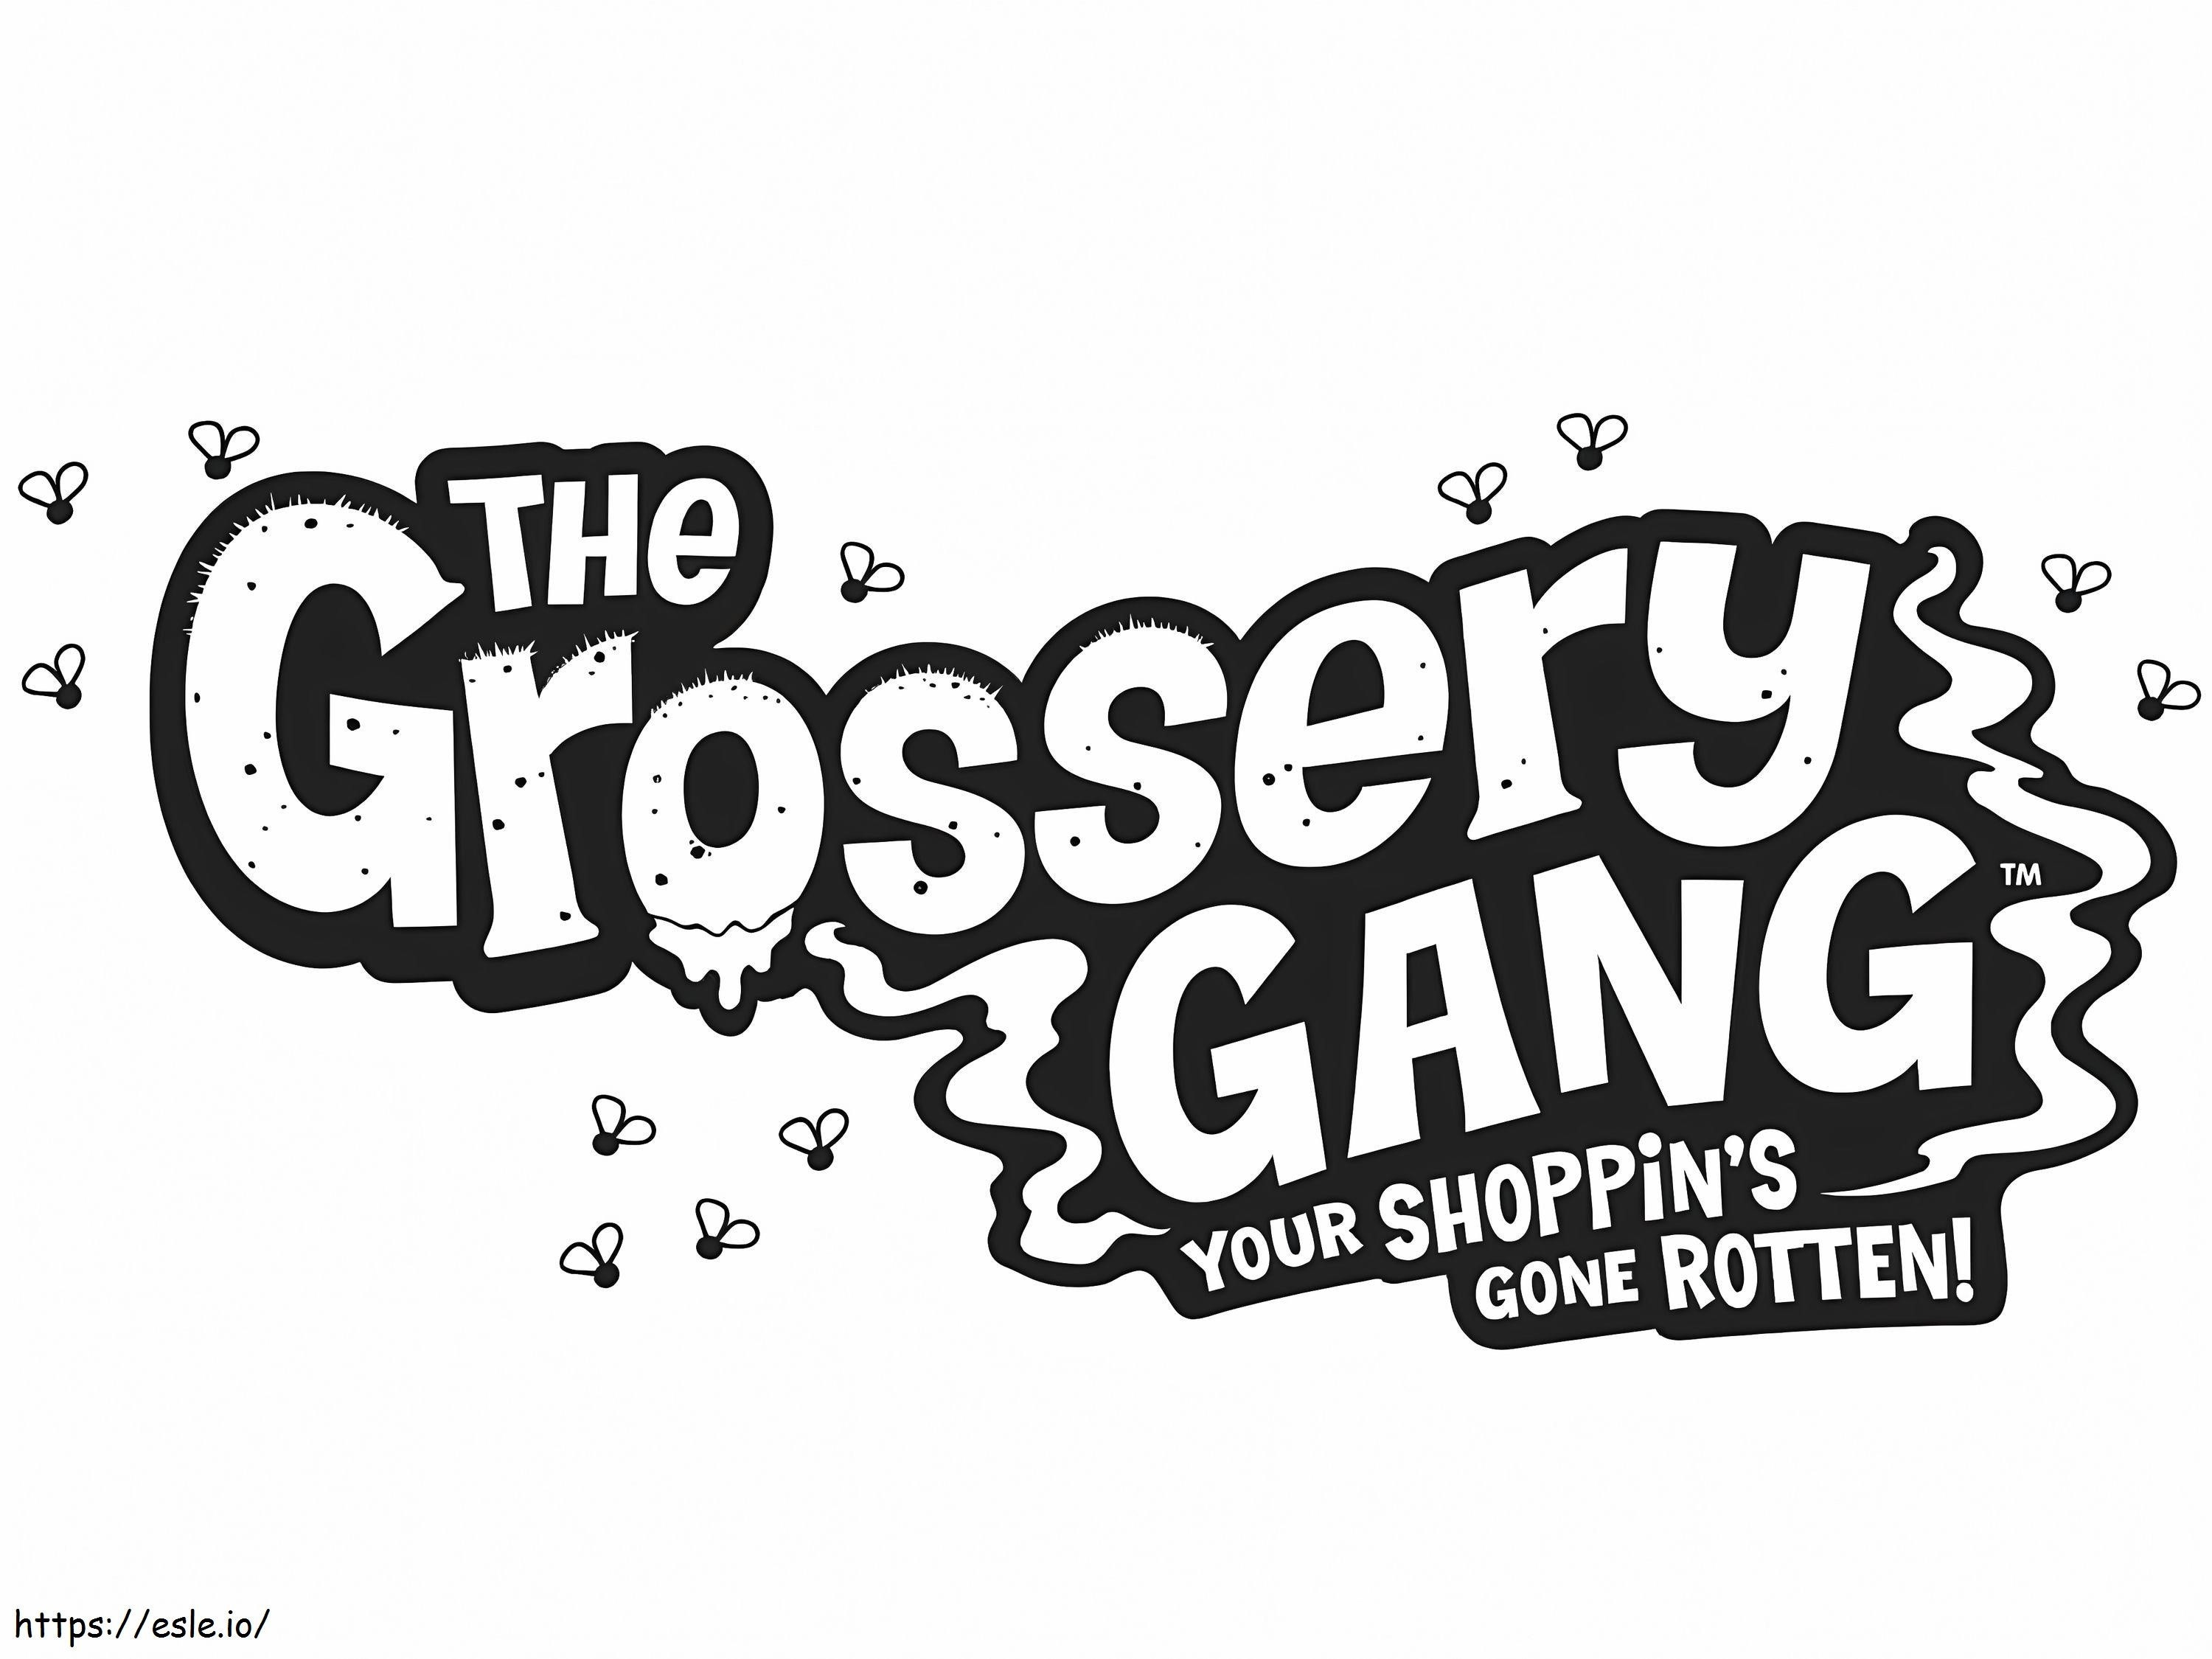 Grossery Gang Logo coloring page